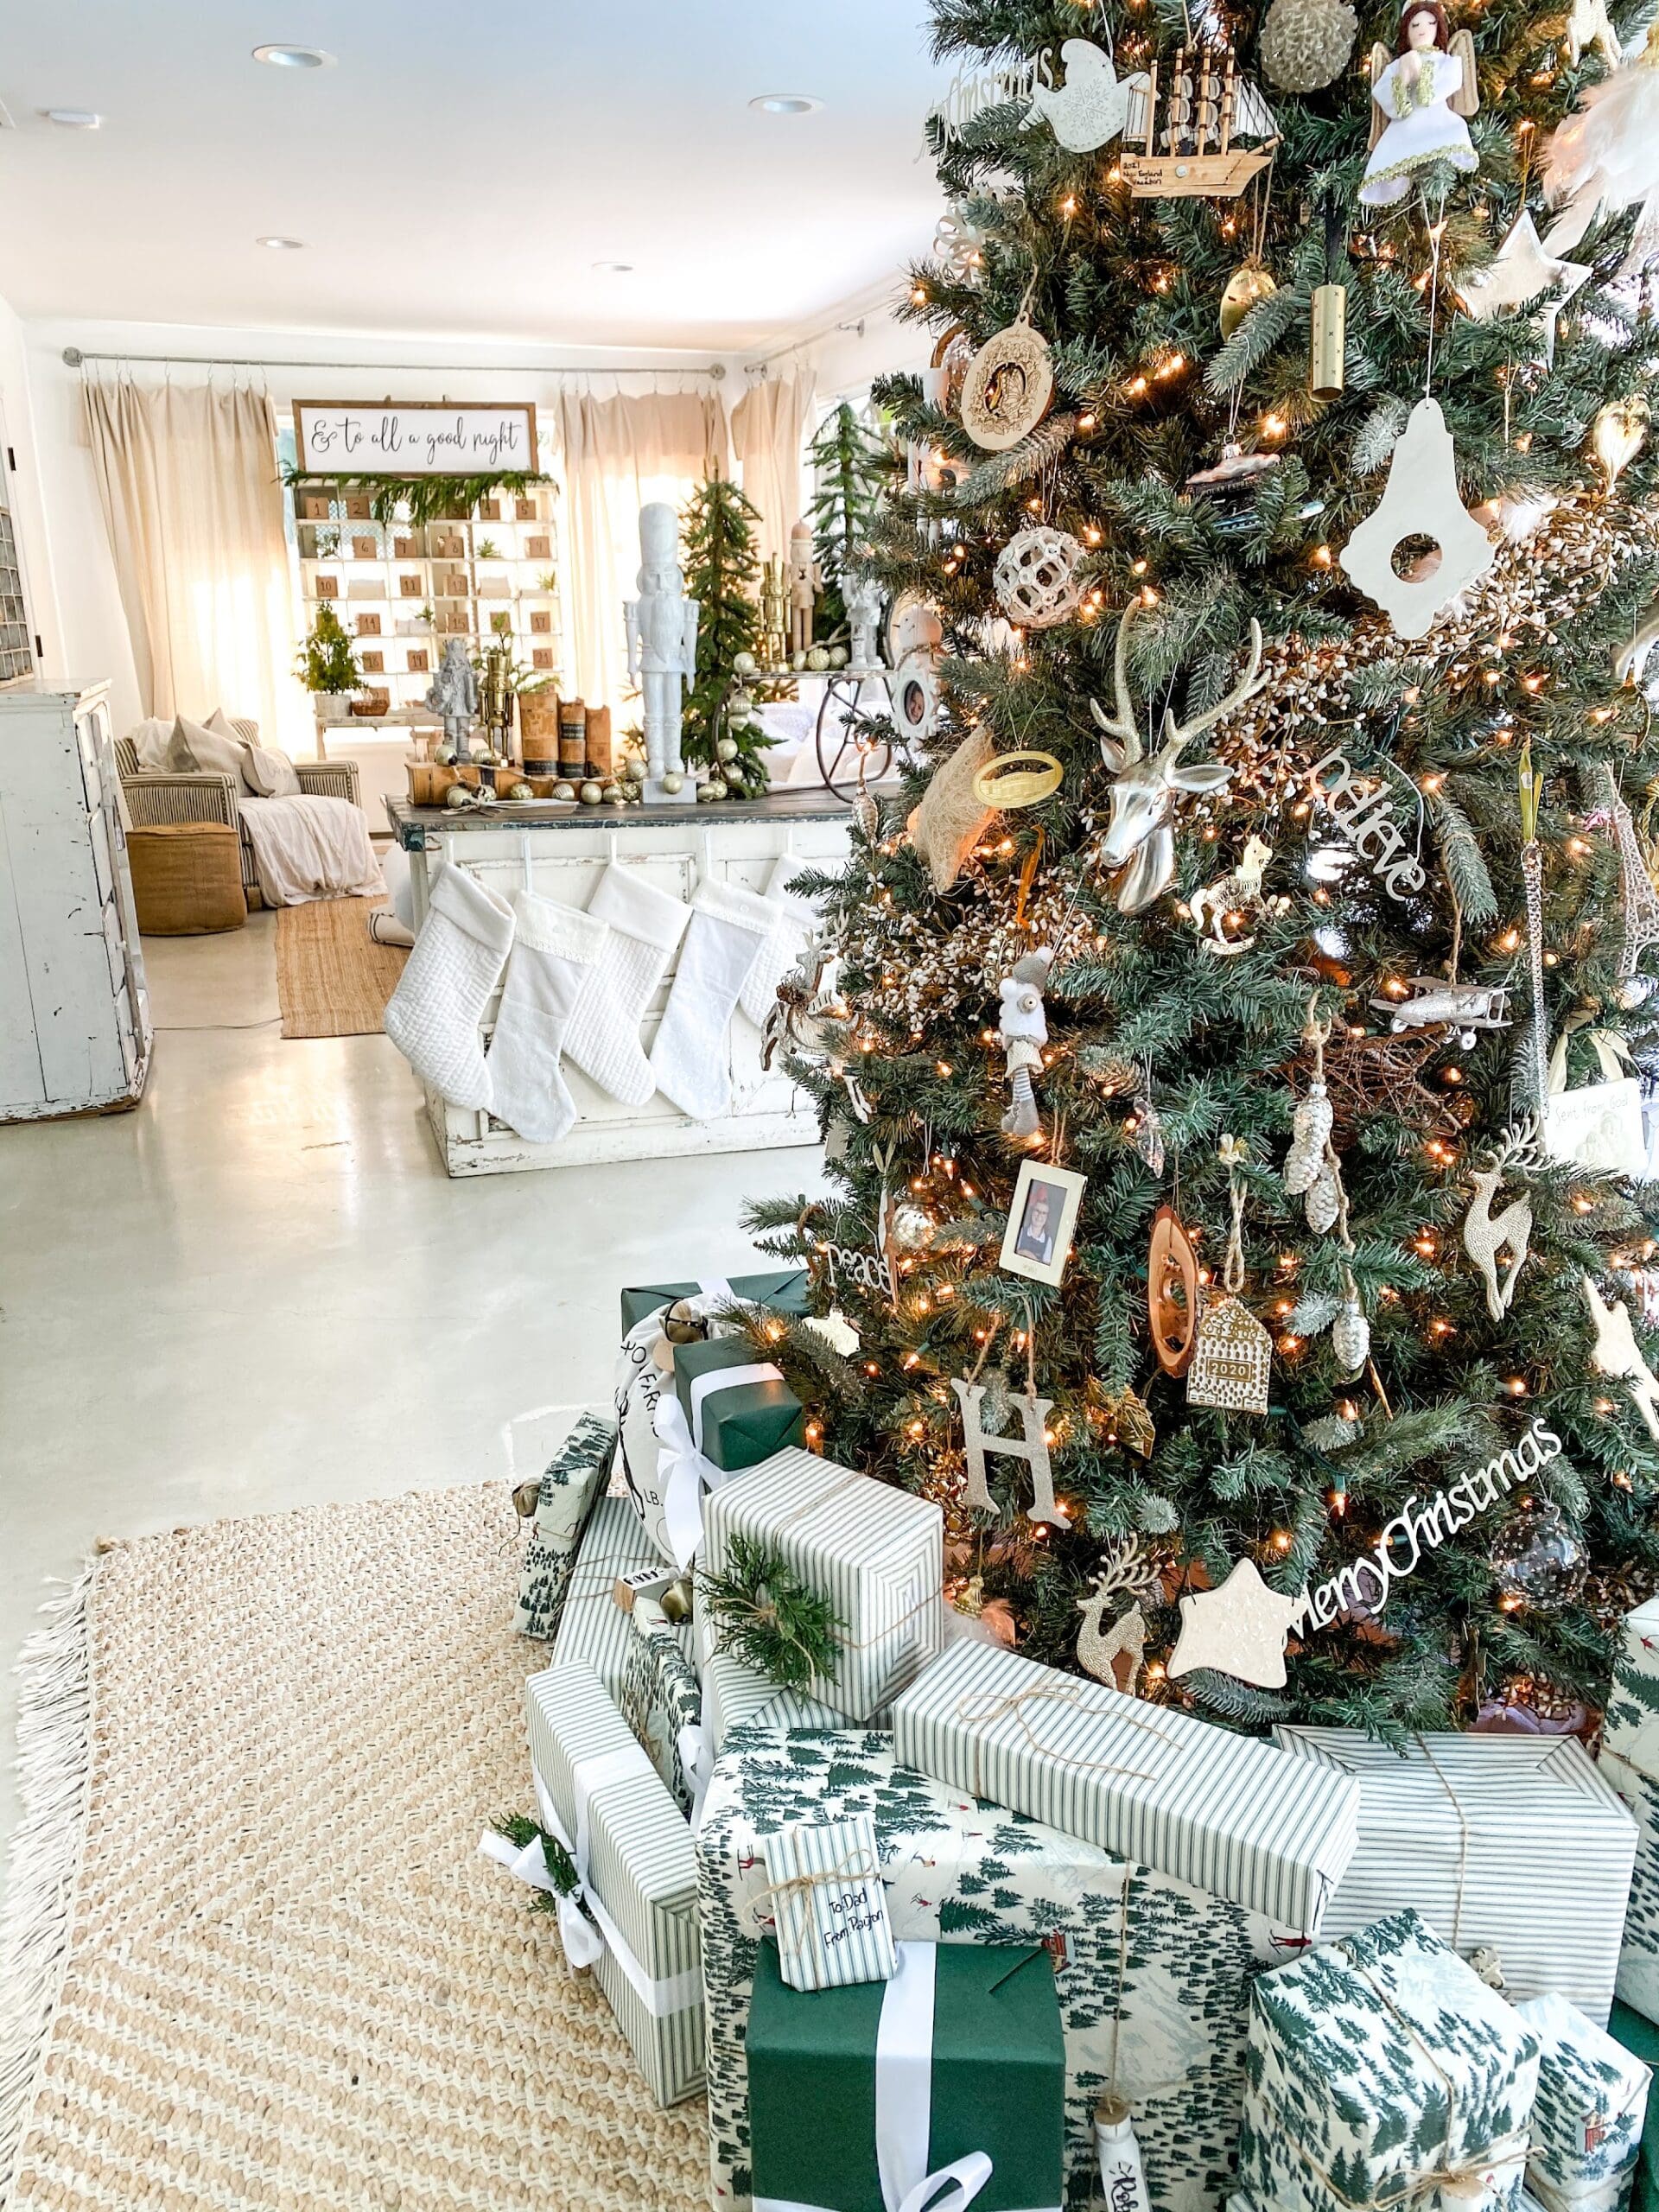 White and green colored wrapped presents underneath a large Christmas tree